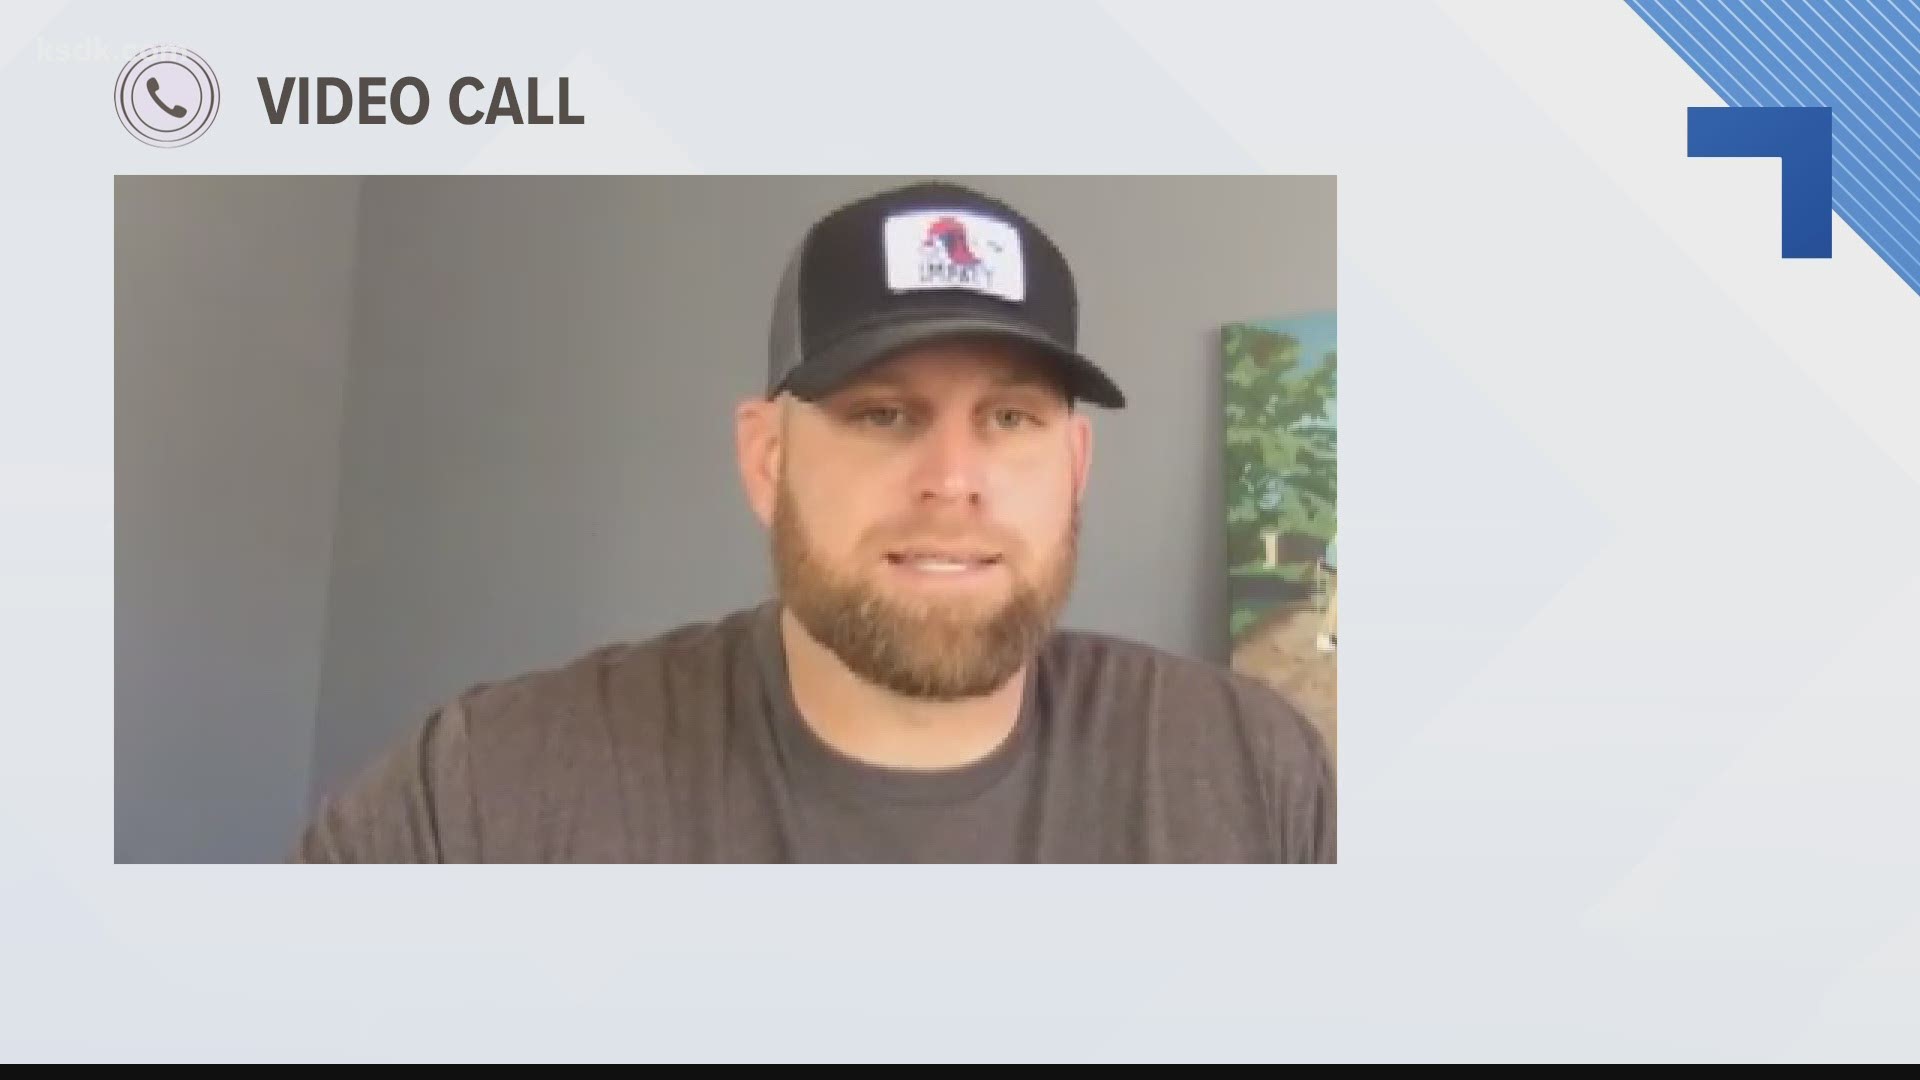 Former Cardinals pitcher Kyle McClellan is working to improve the living conditions and opportunities for people 1,700 miles away from St. Louis.